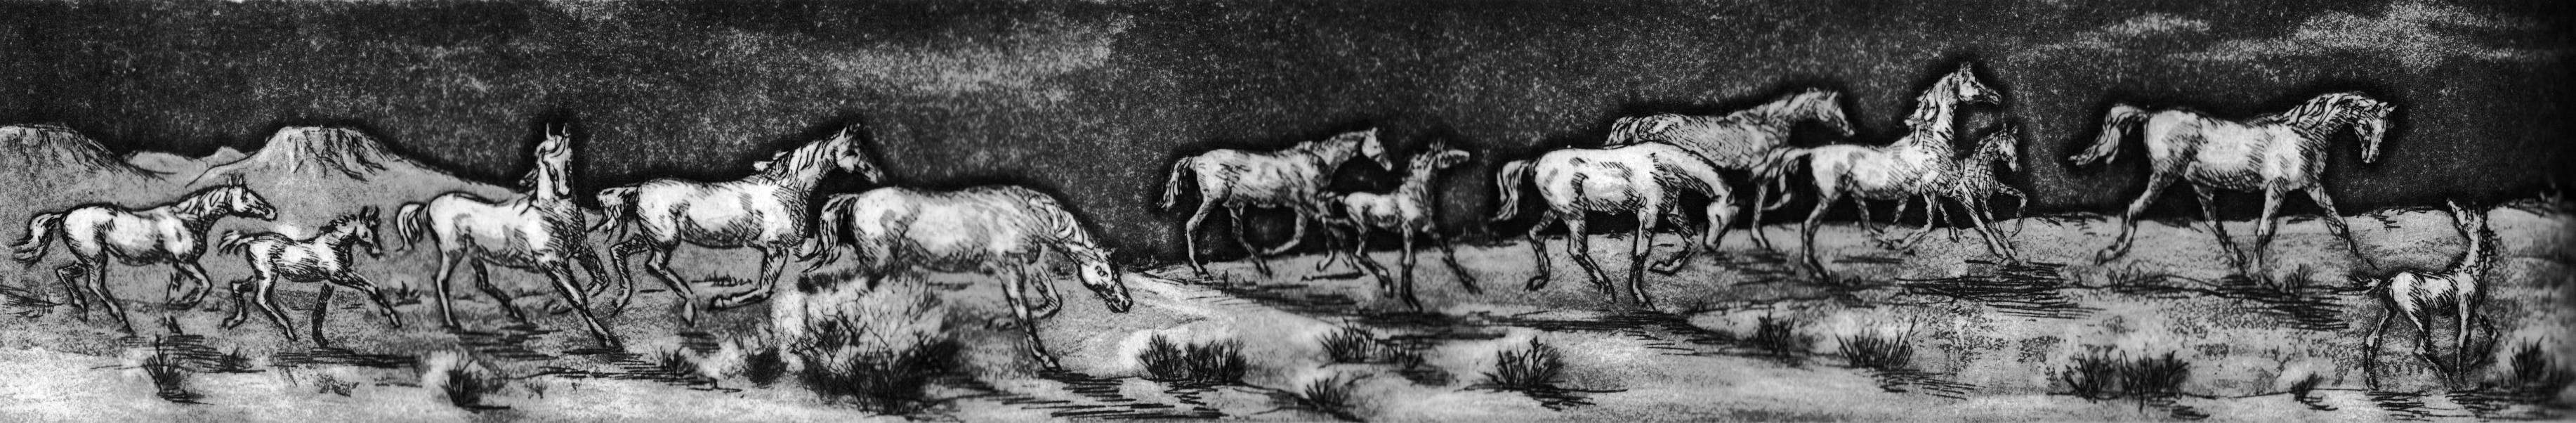 13 Horses in the Moonlight - Etching